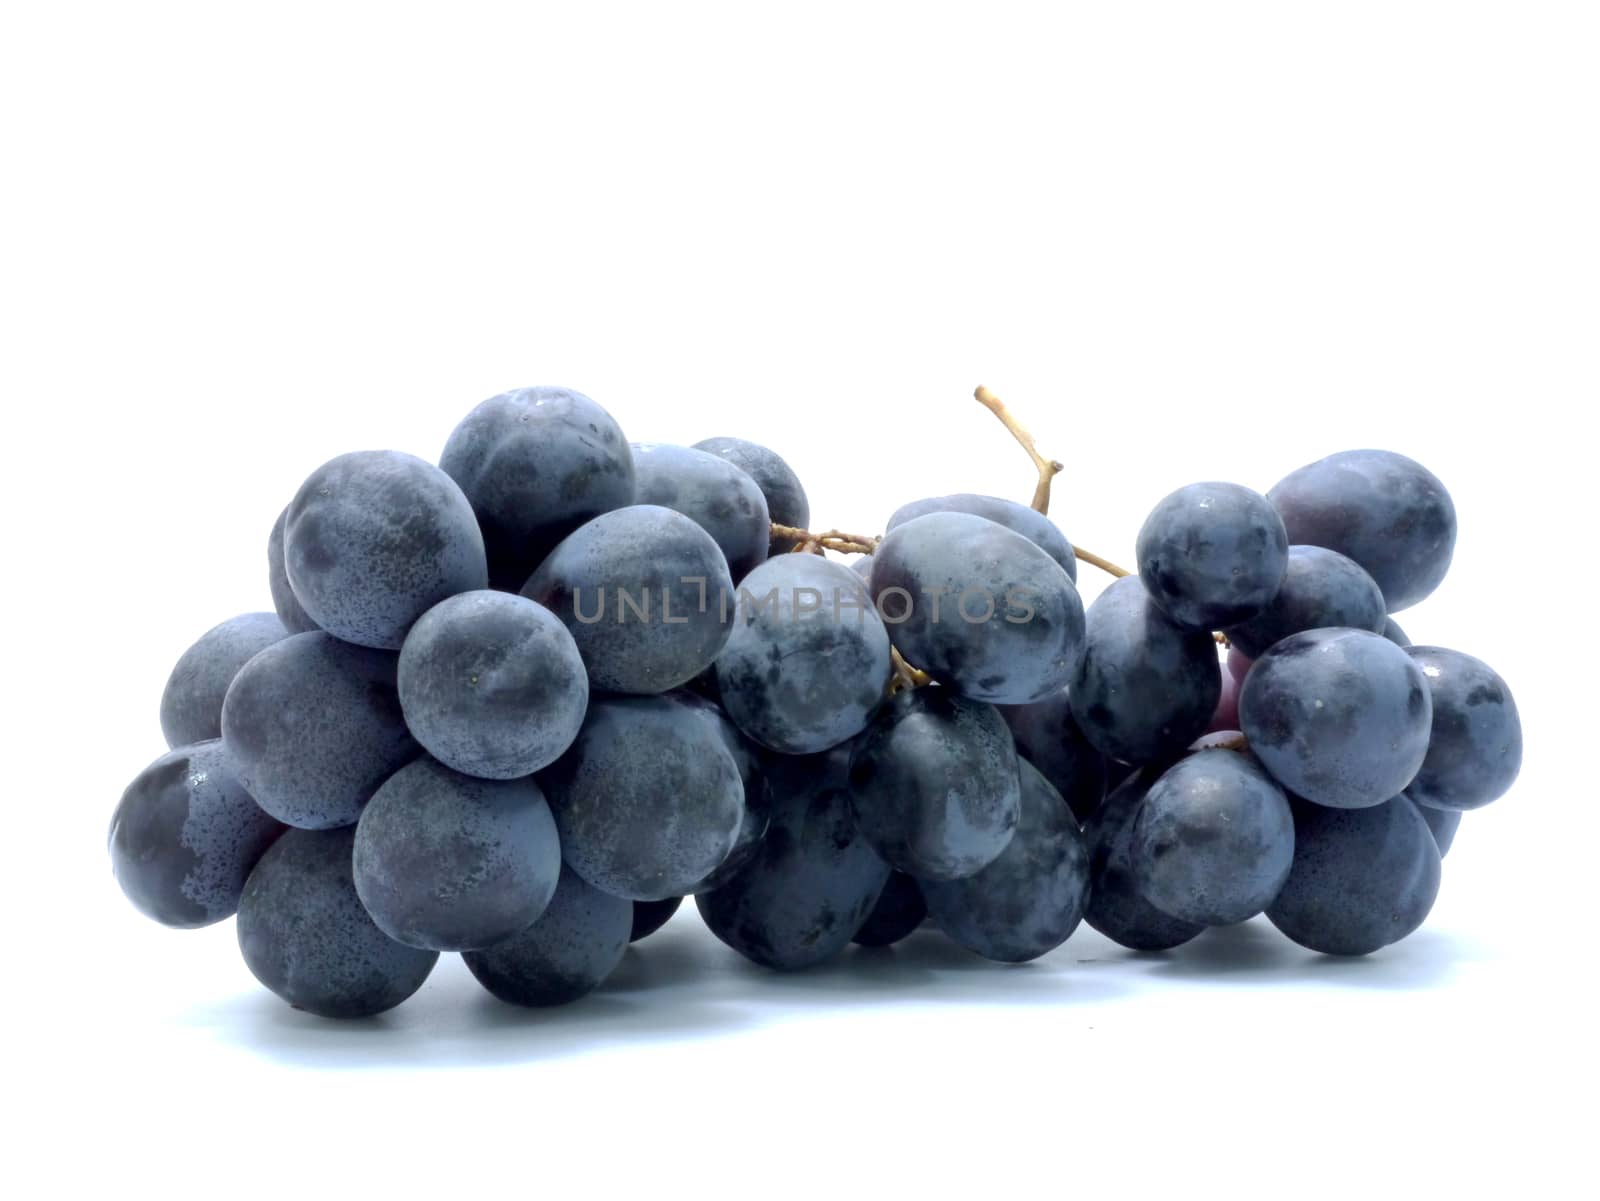 Black grapes isolated on white background. by Noppharat_th